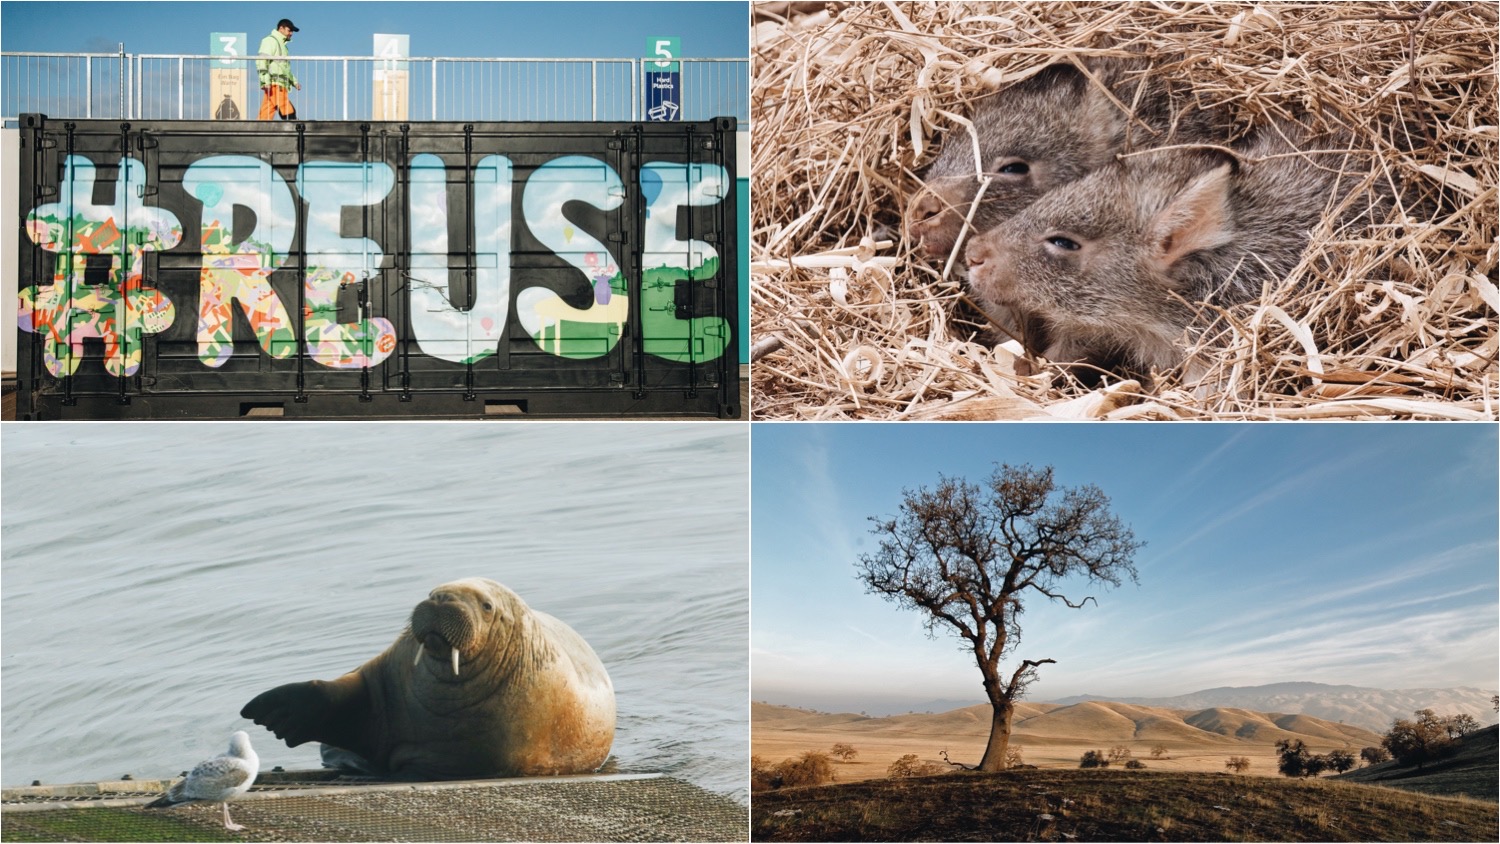 Clockwise from top left. Shipping container with "reuse" painted on it, two northern bettongs in a nest, a lone tree in a national park, and a large walrus visiting UK land.